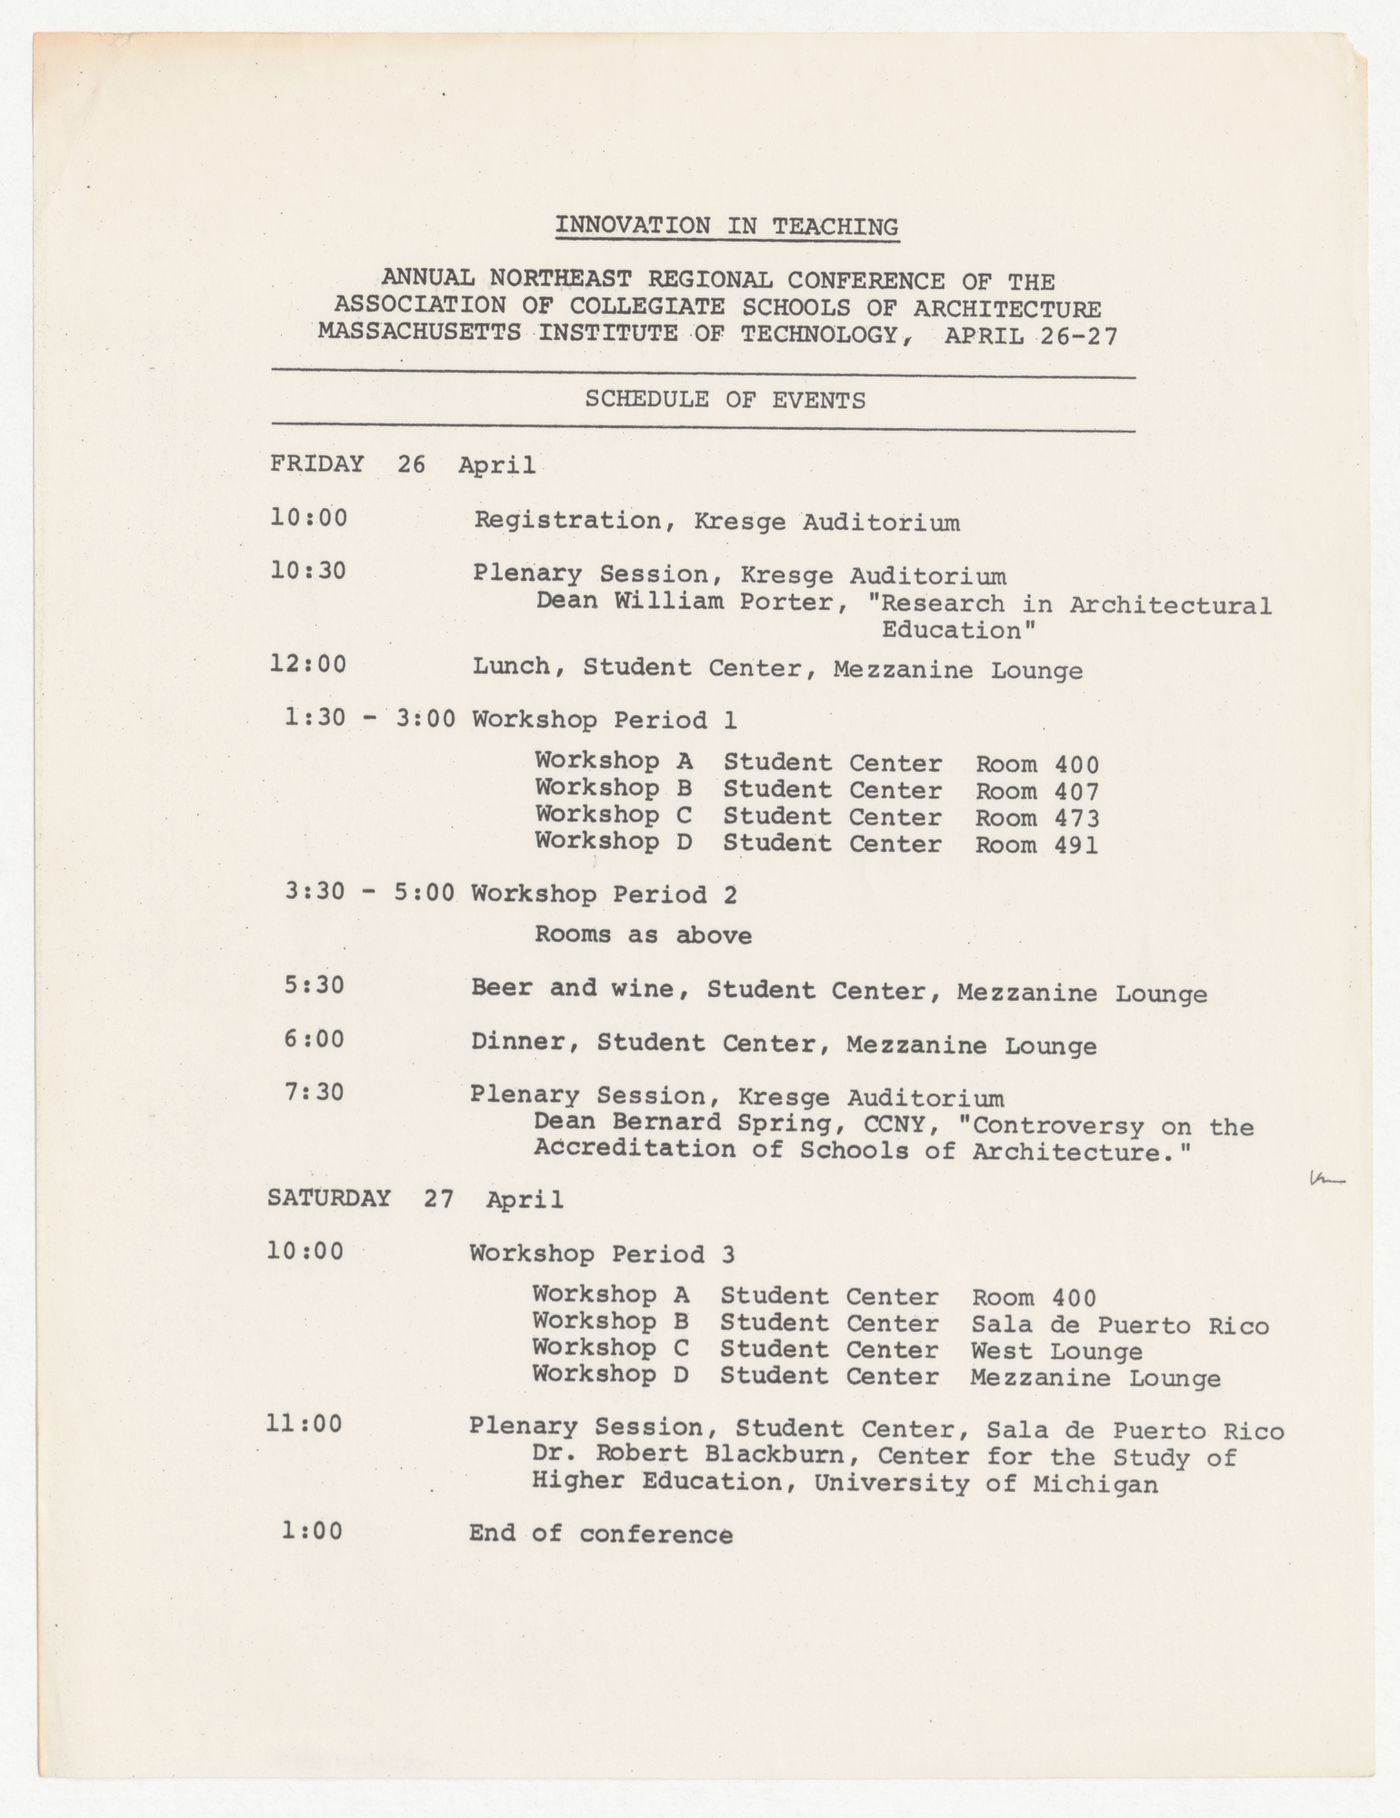 Schedule of events for the Annual Northeast Regional Conference of the Association of Collegiate Schools of Architecture